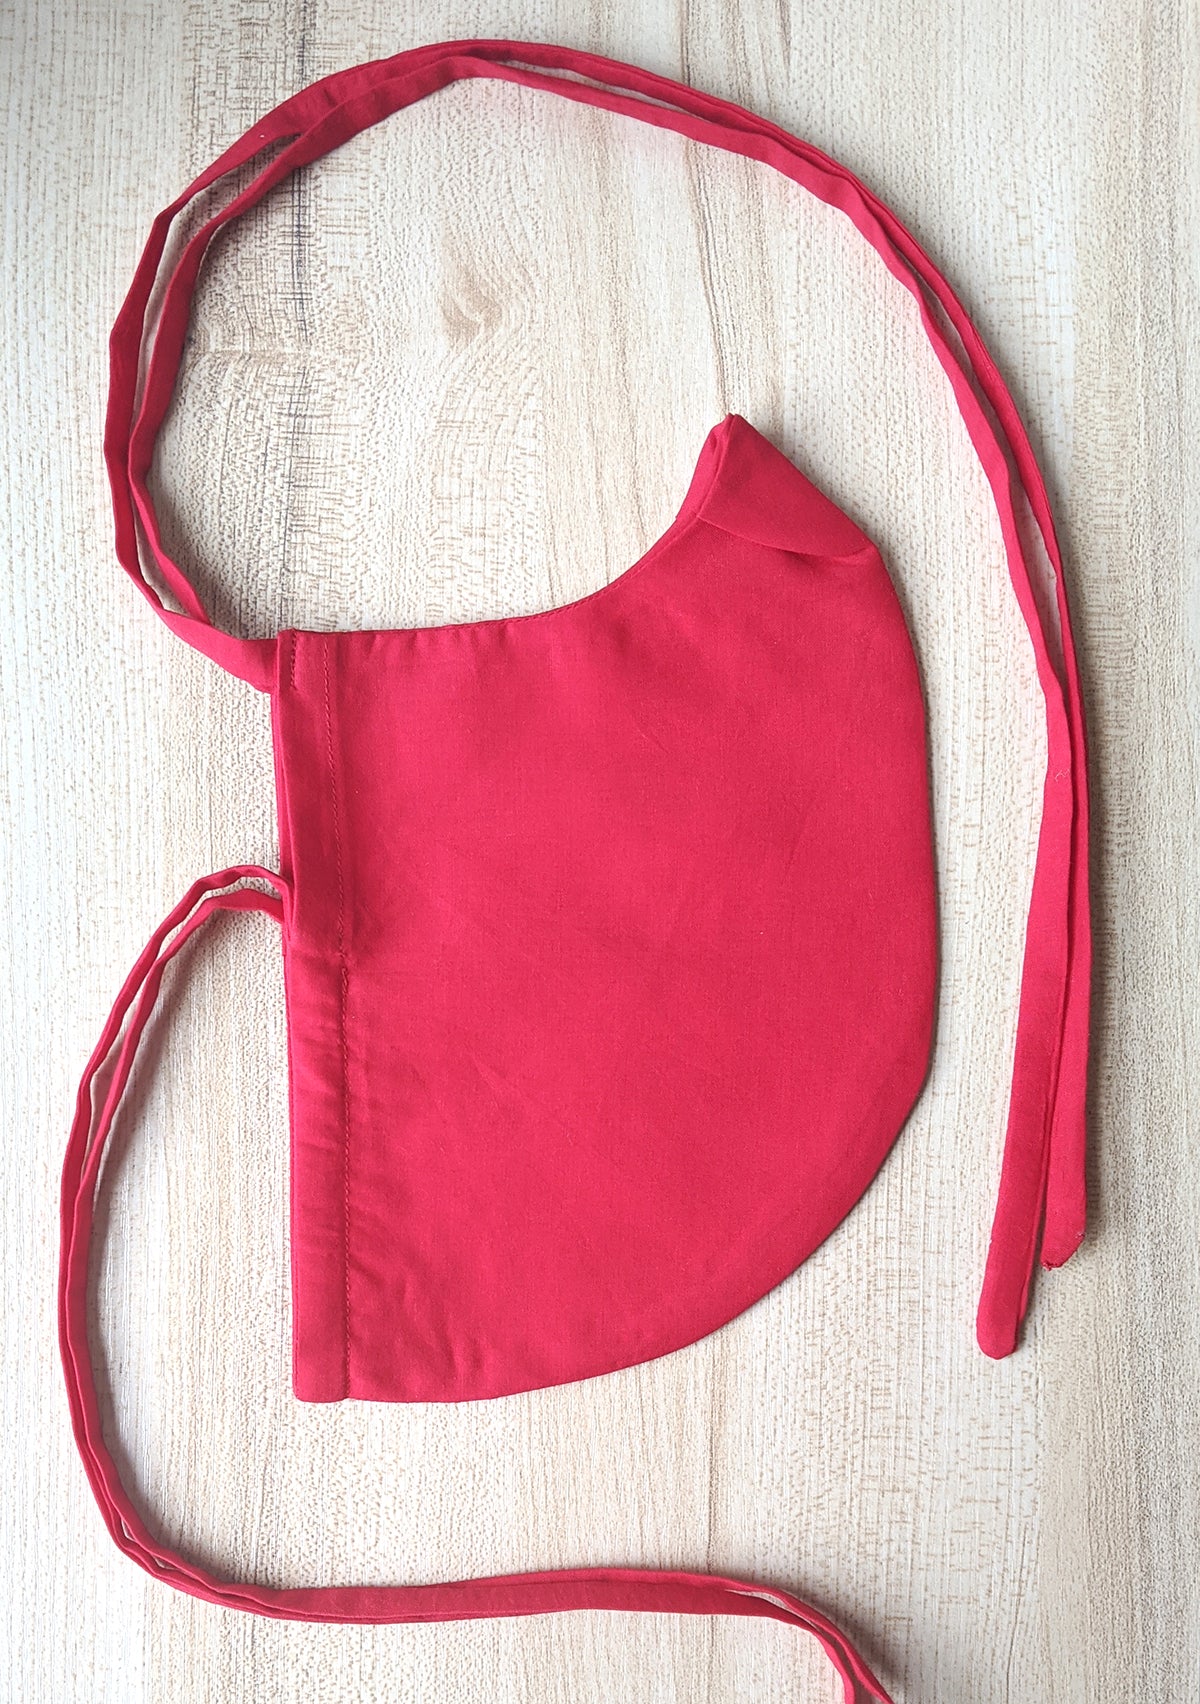 Sold Red Reusable Cloth Face Mask with Drawstring - Side View - Harleen Kaur Menswear